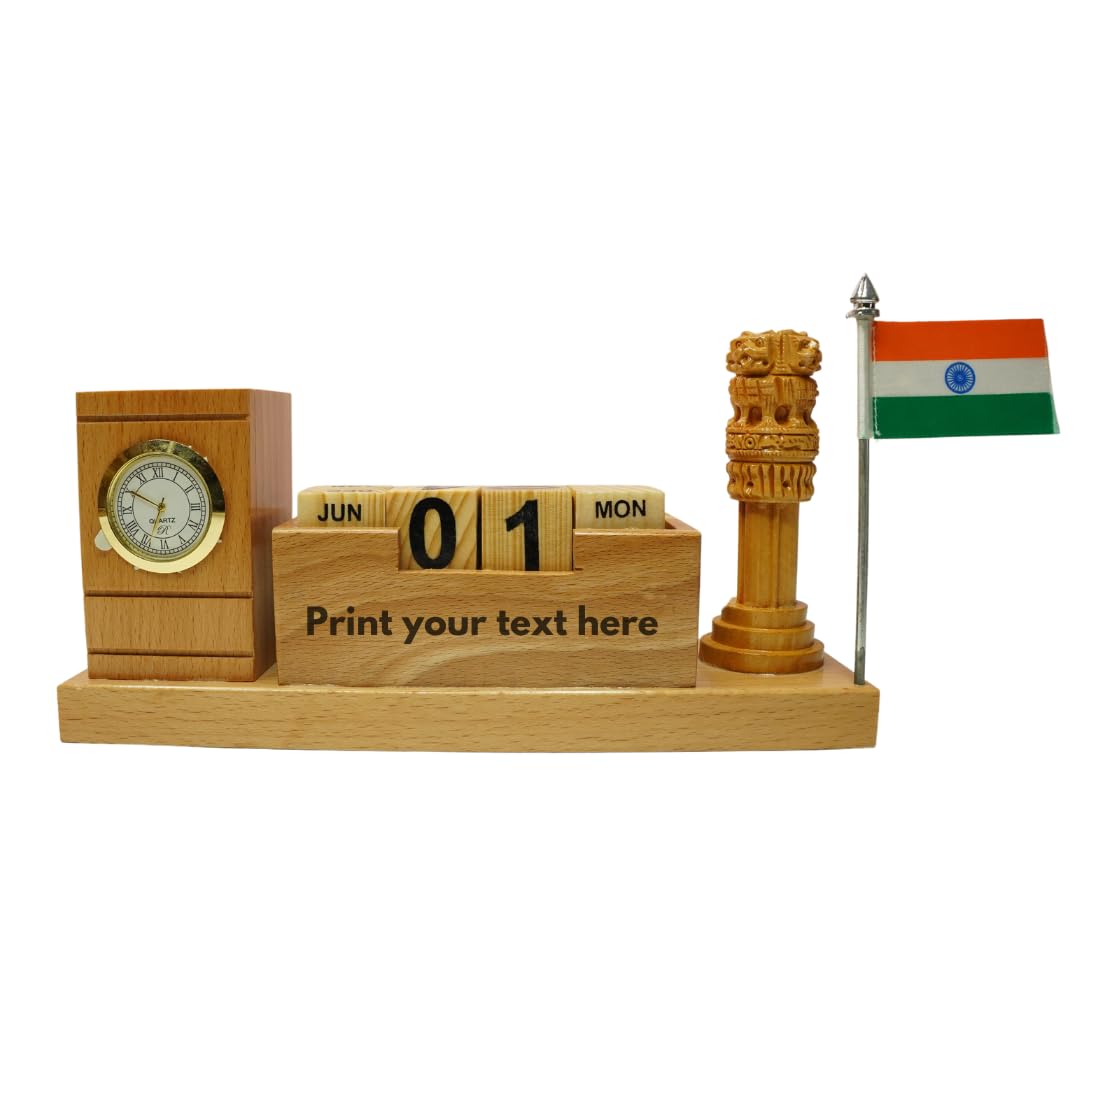 Craft Closet & Gifts - Wooden Desk Organizer with Pen Stand, Mobile Holder, Flag, Ashoka Pillar, Clock, and Calendar - Personalized Office Accessory For IAS, Advocates, Office & Corporate Gifts